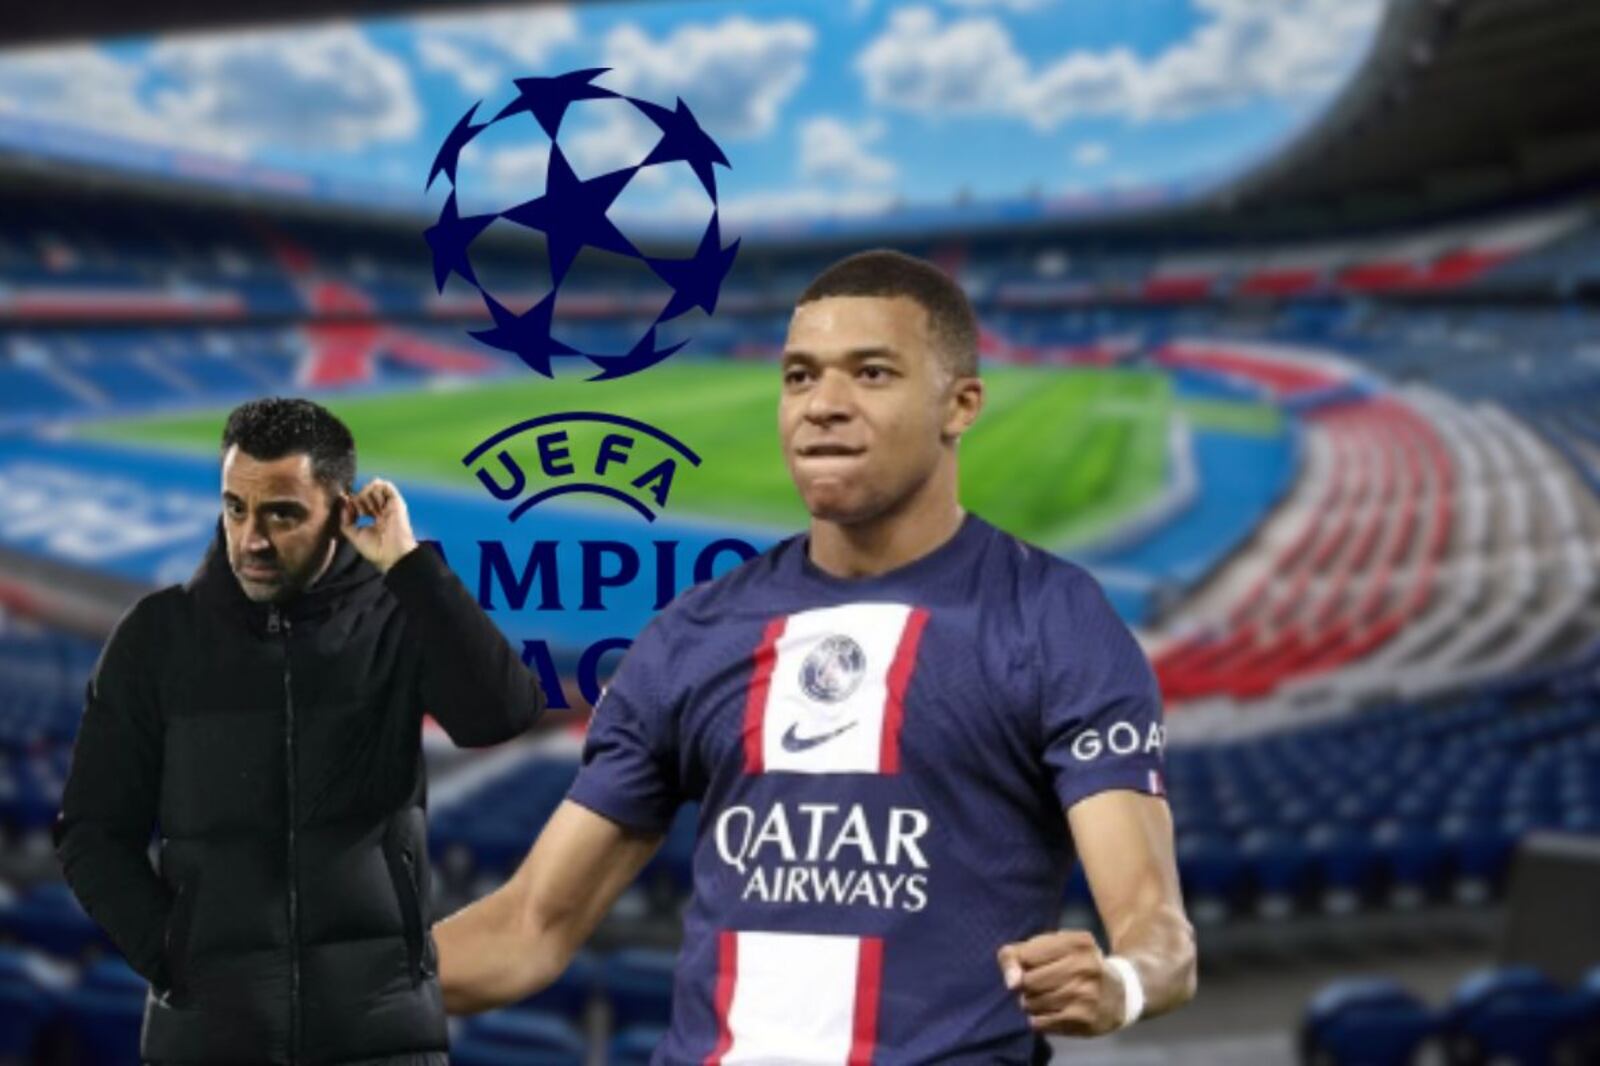 Mbappé's incredible warning to Barcelona before UCL clash, Xavi trembles